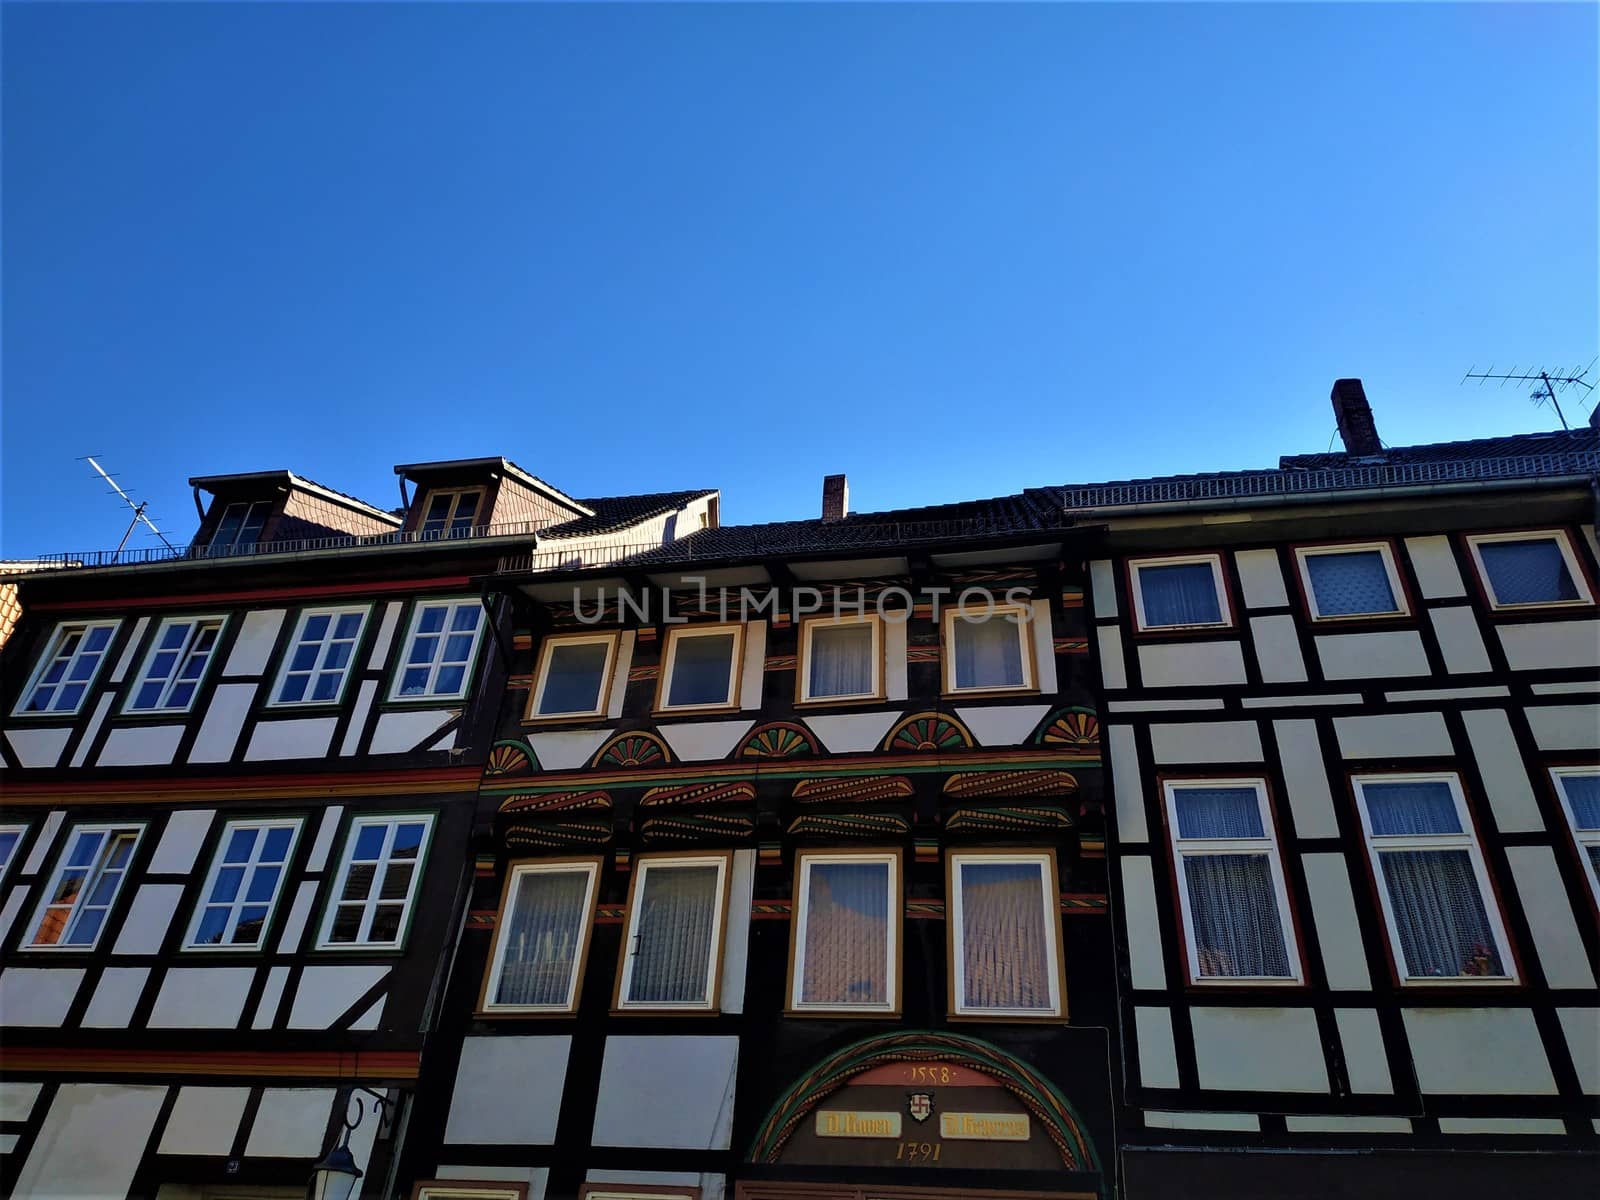 Half timbered house in the old town of Einbeck, Germany